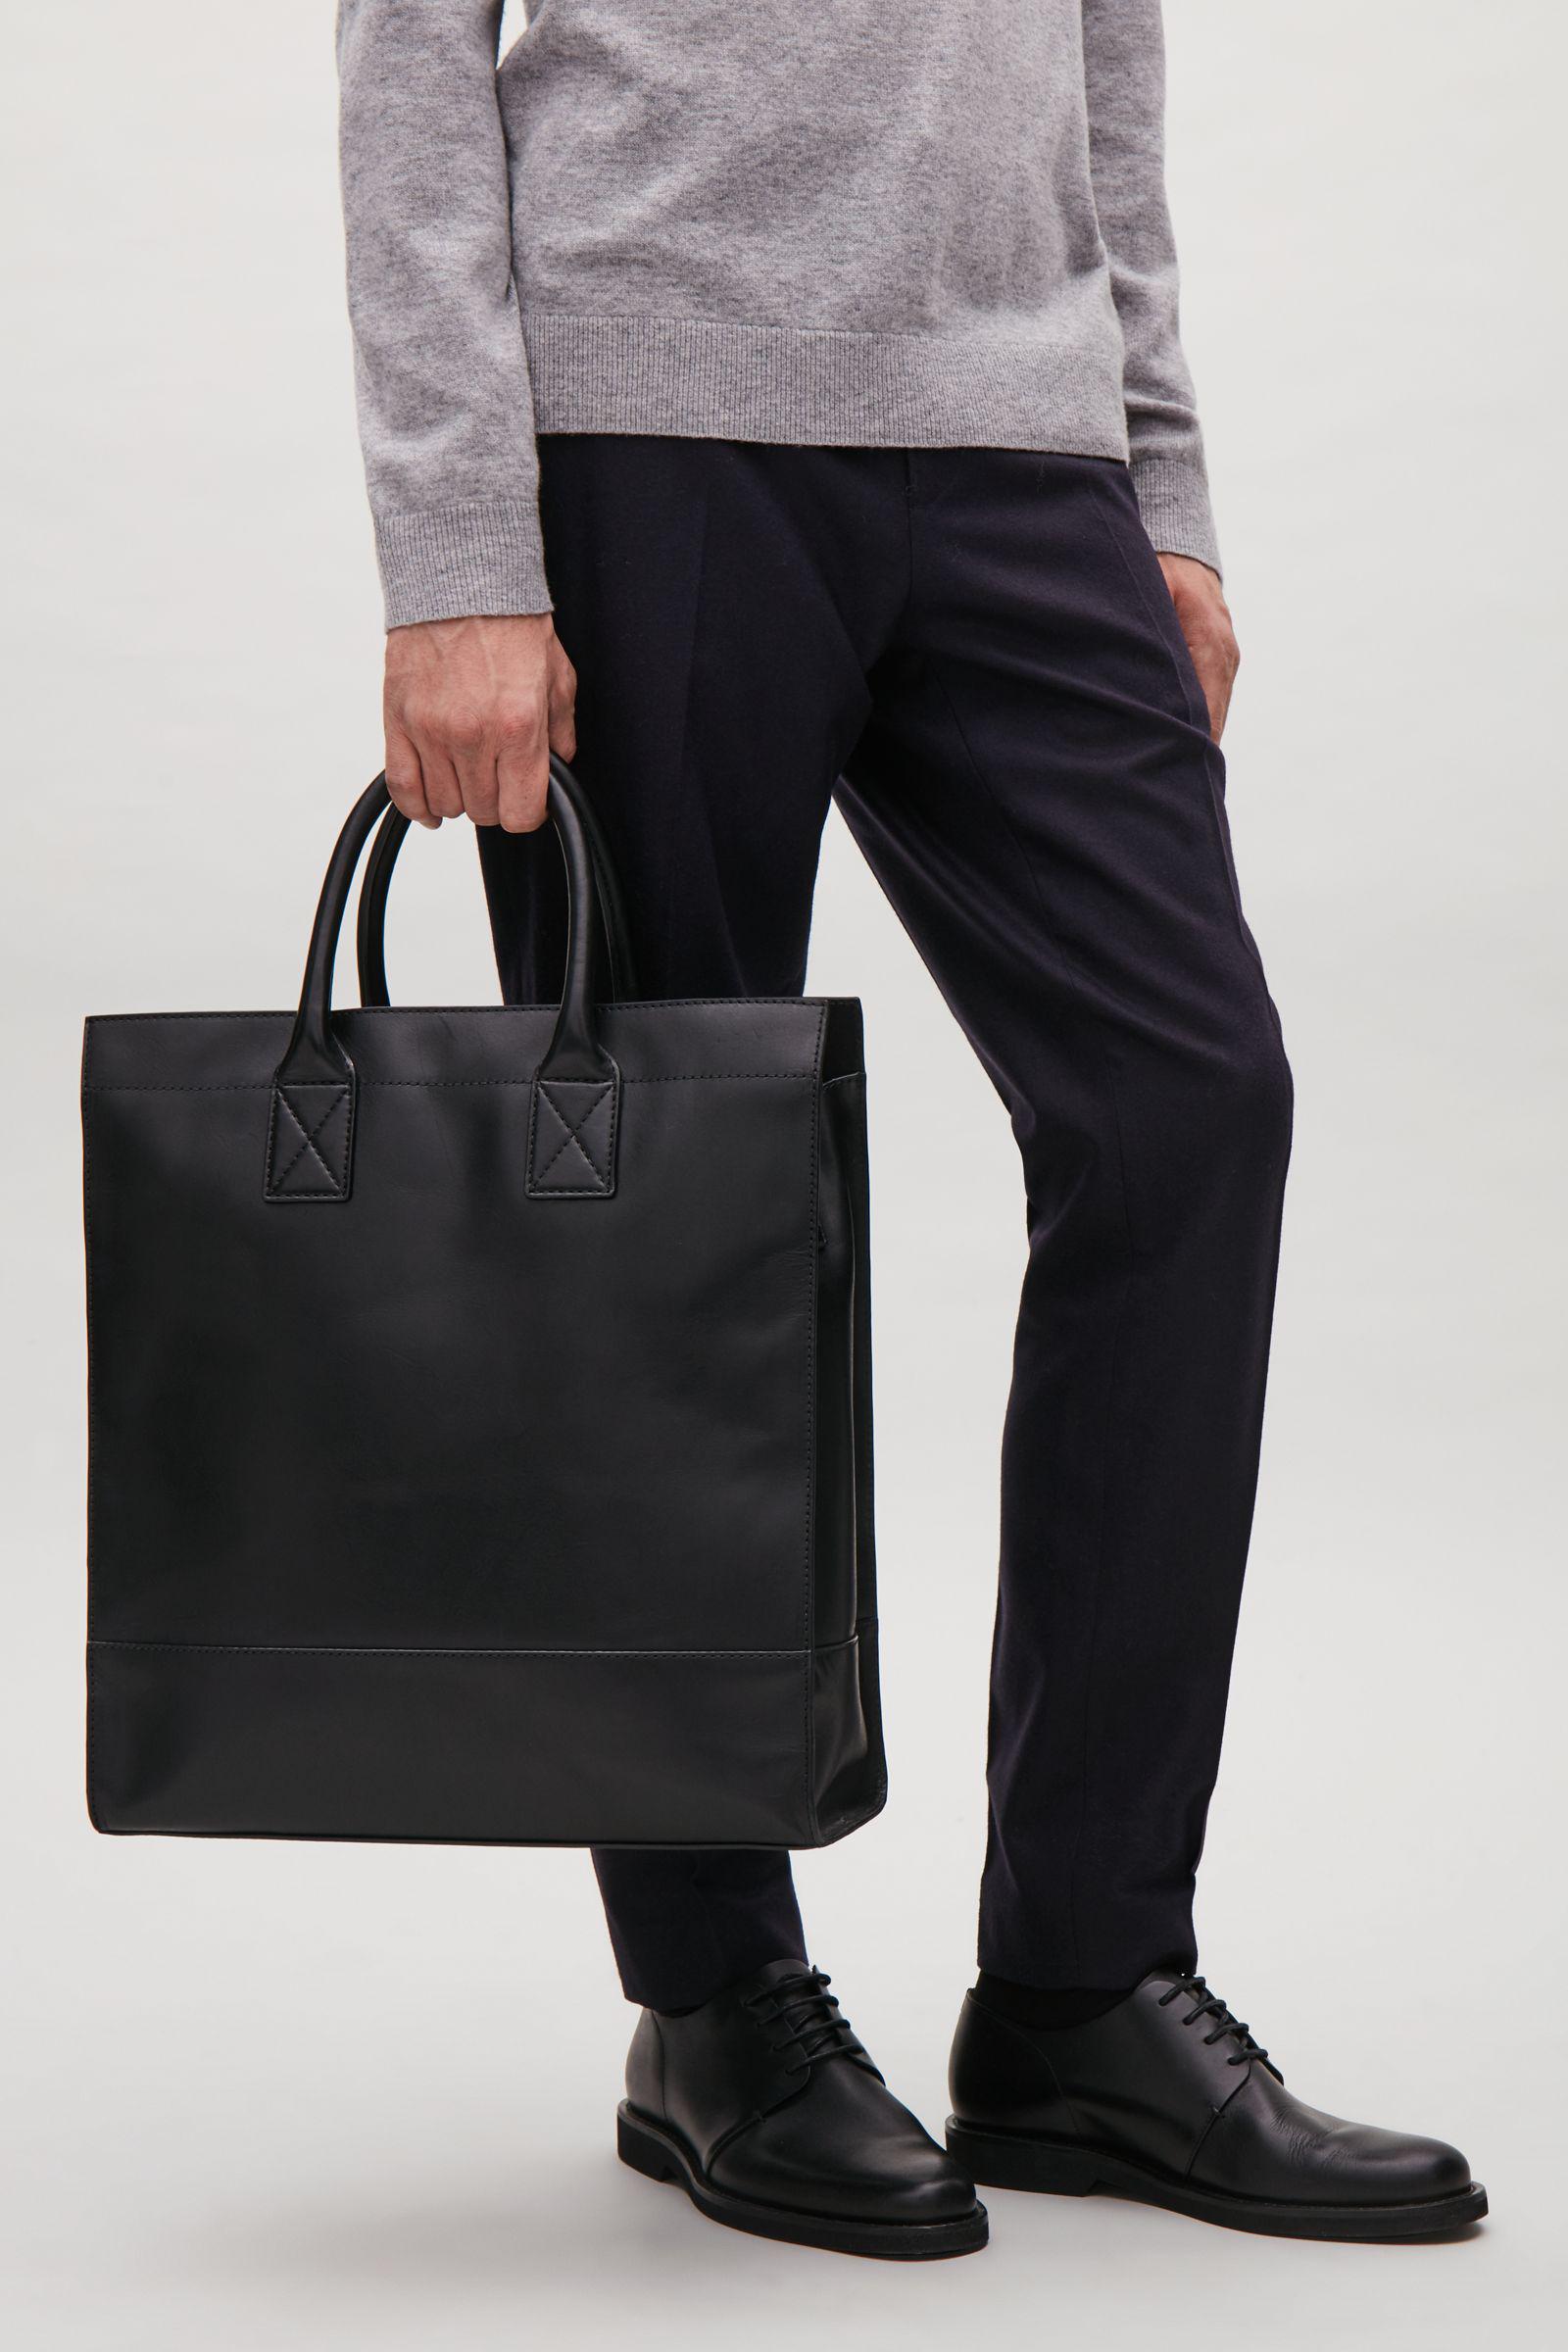 Lyst - Cos Leather Tote Bag in Black for Men